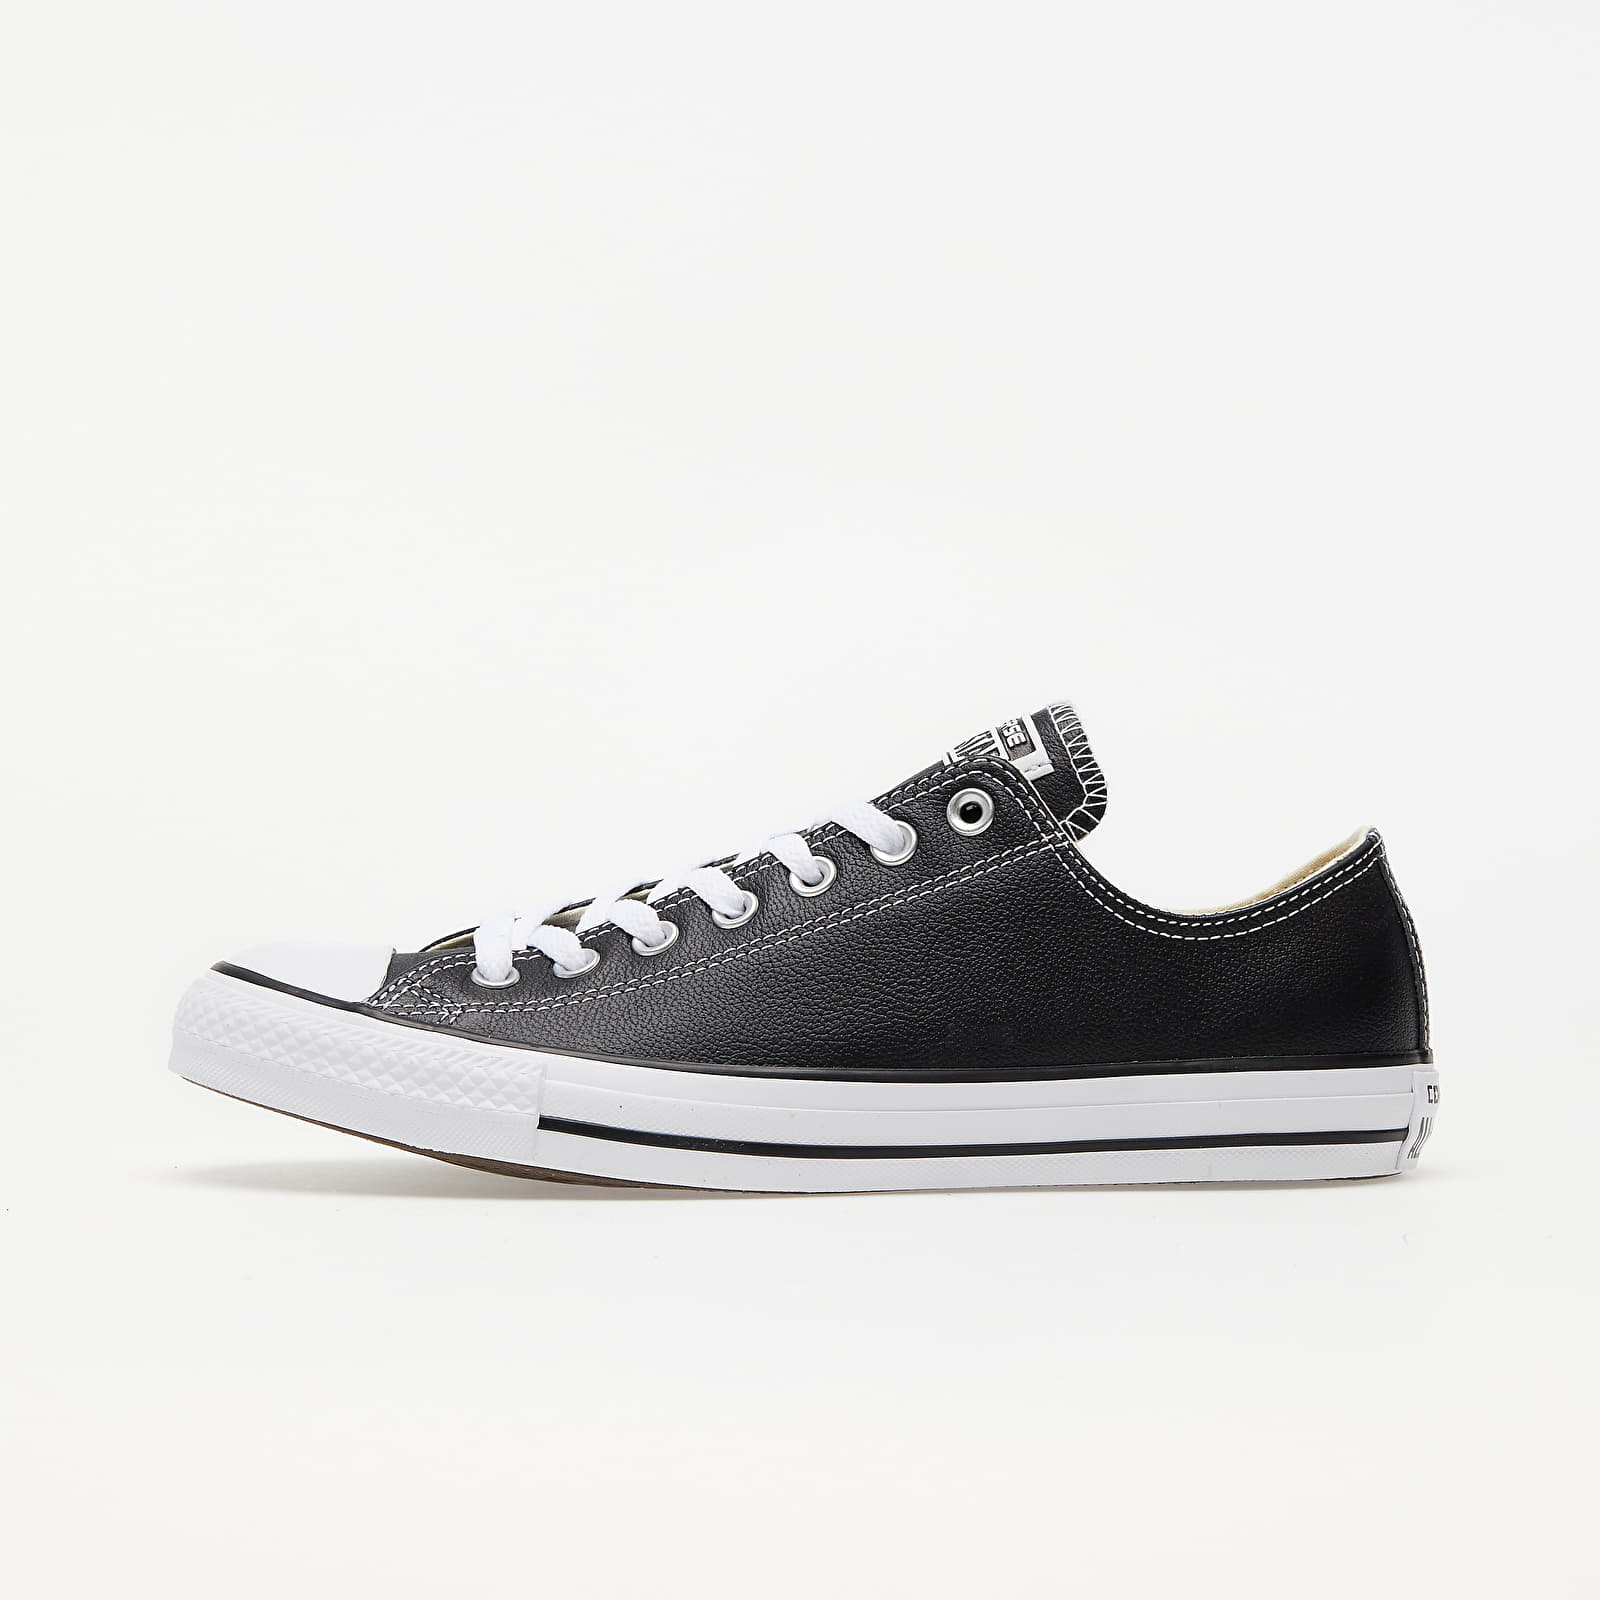 Women's shoes Converse Chuck Taylor All Star OX Black